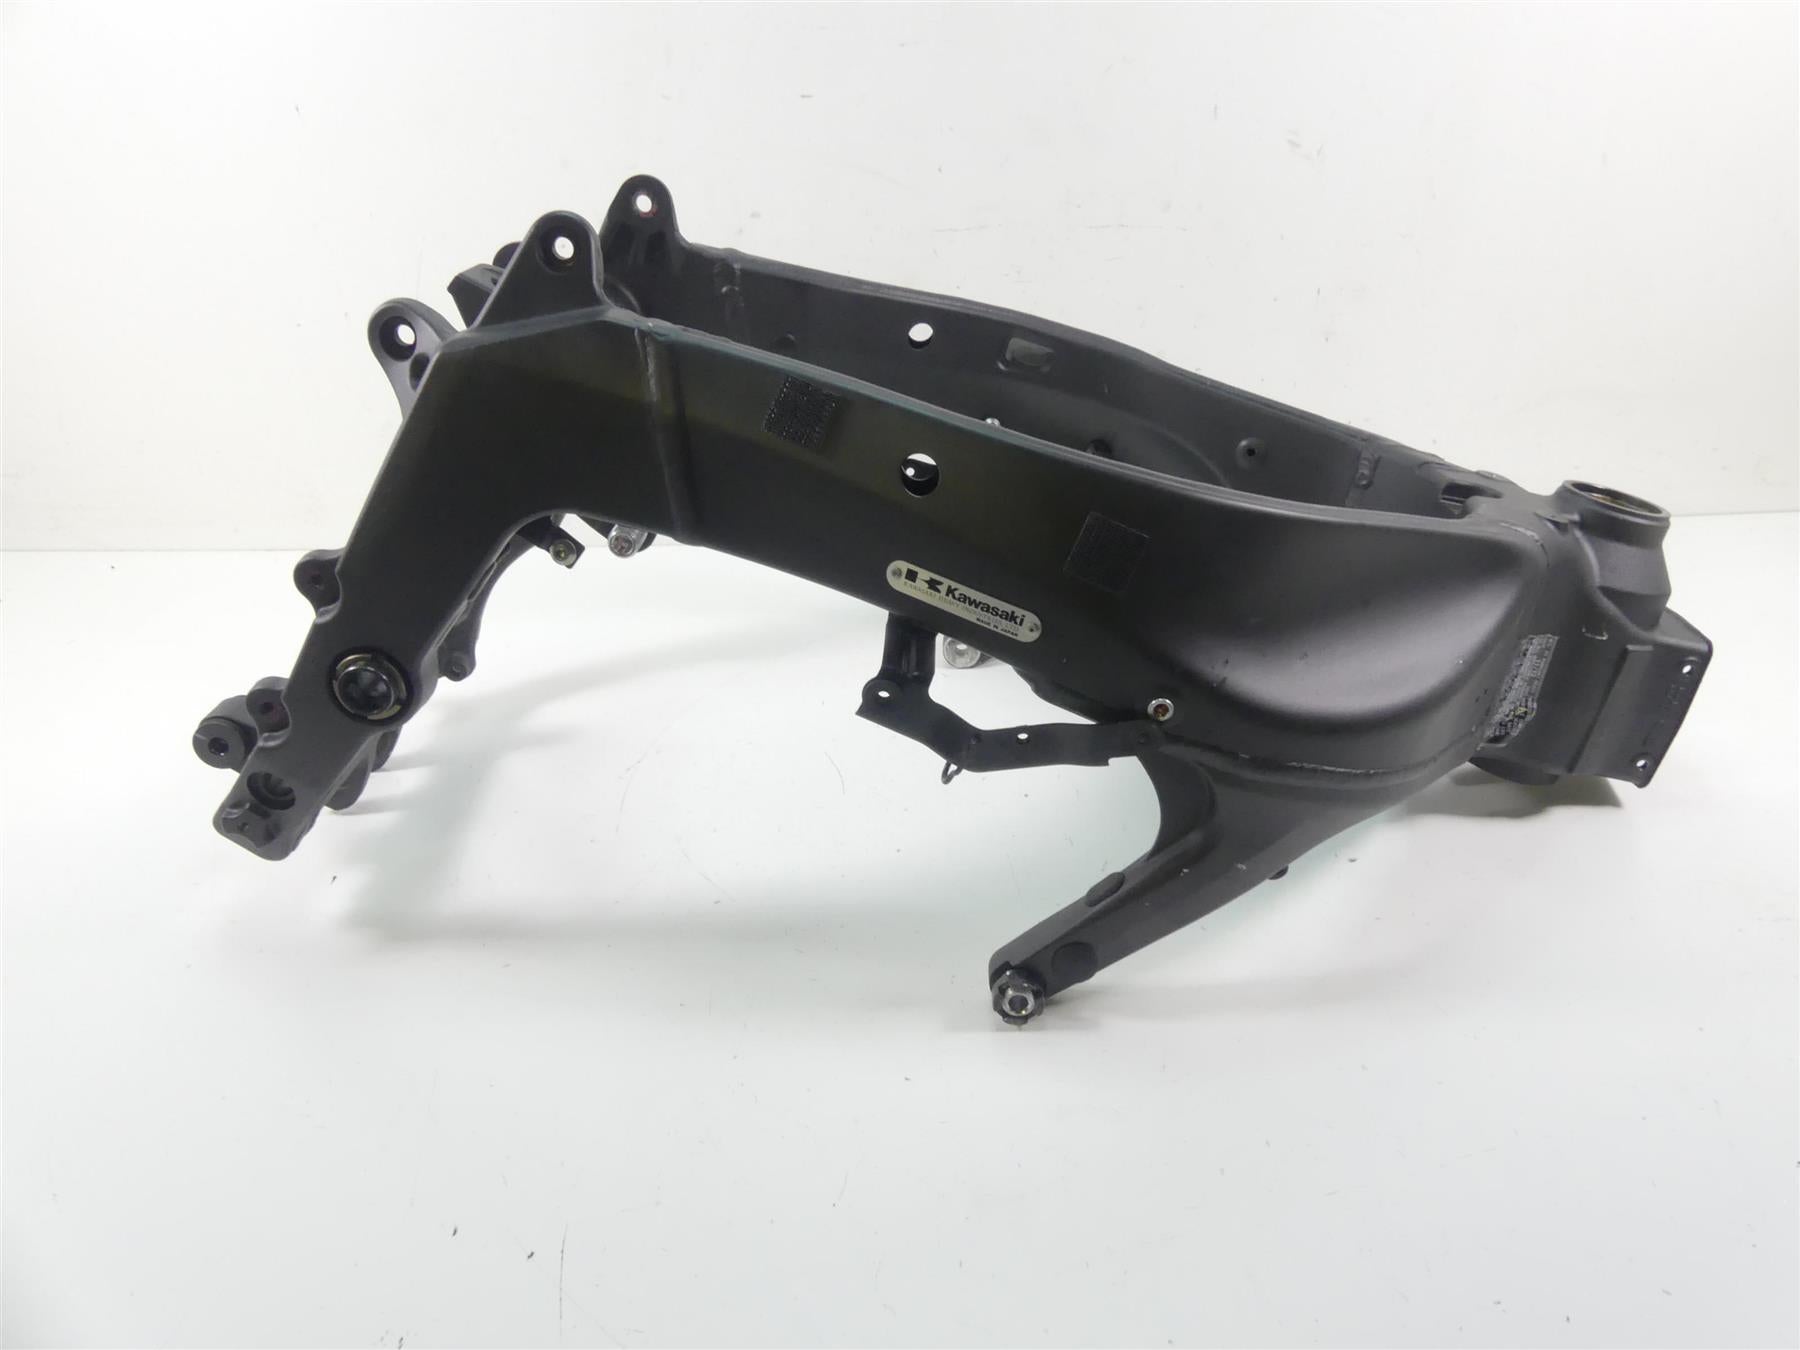 2013 Kawasaki ZX636 ZX6R Ninja Main Frame Chassis With Clean Texas Title -  Dented - Read 32160-0642